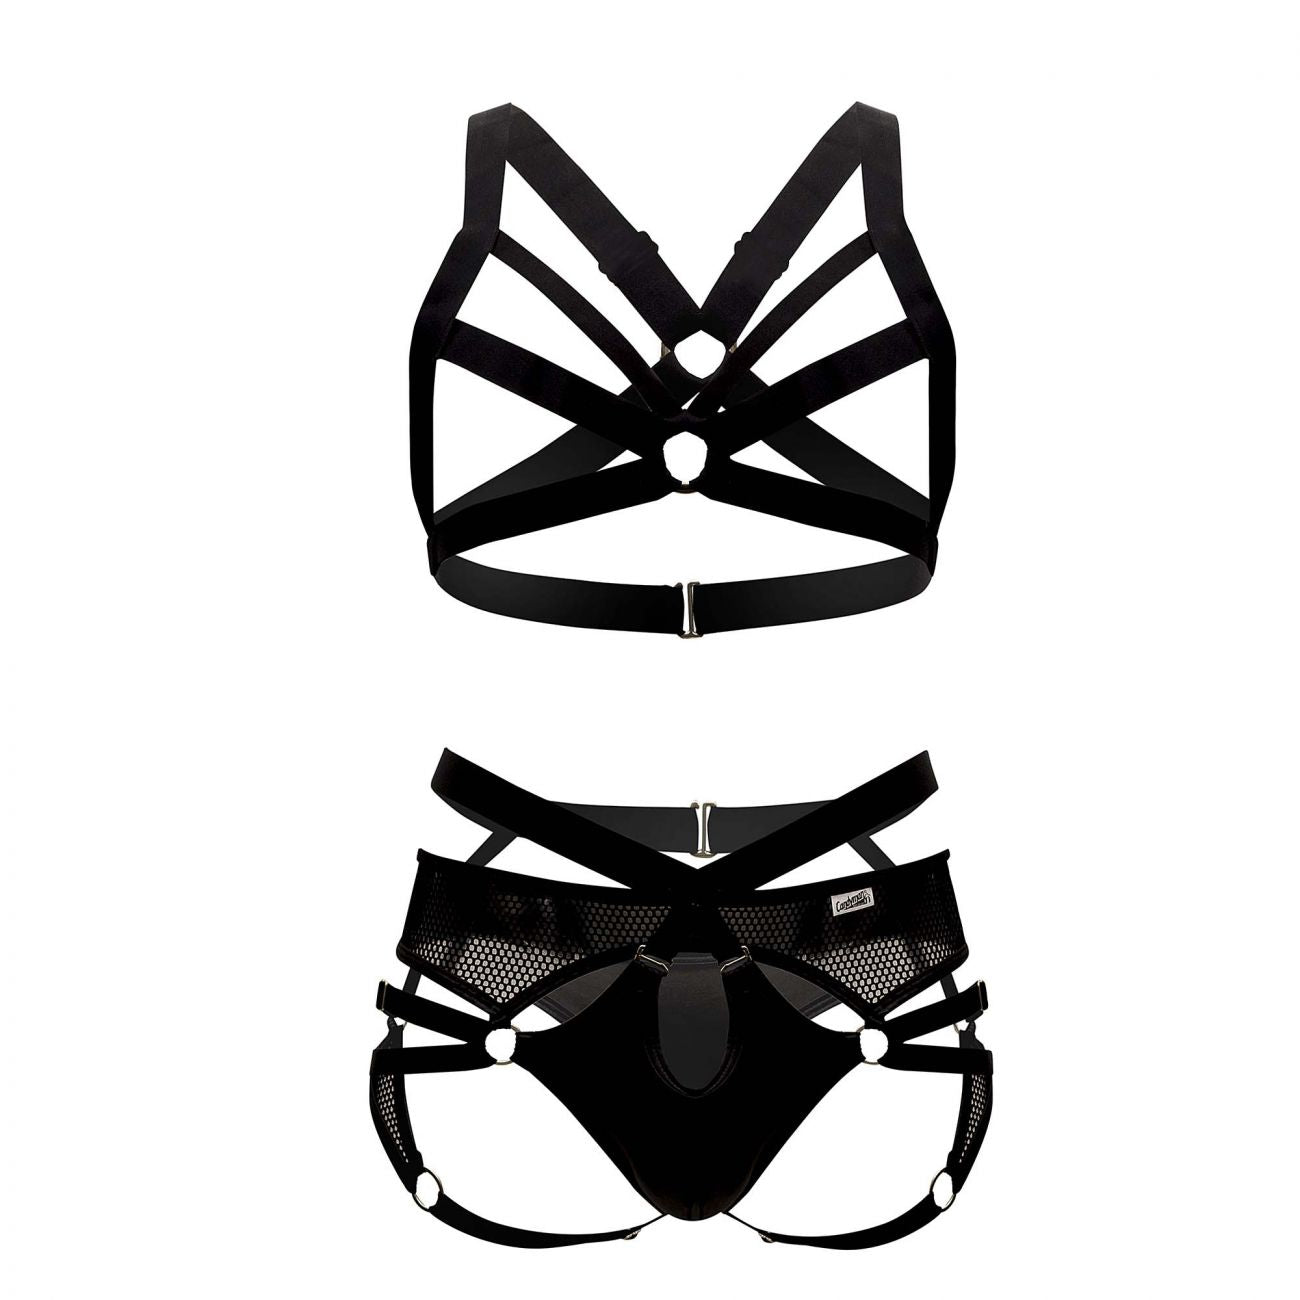 CandyMan 99546X Harness-Thongs Outfit